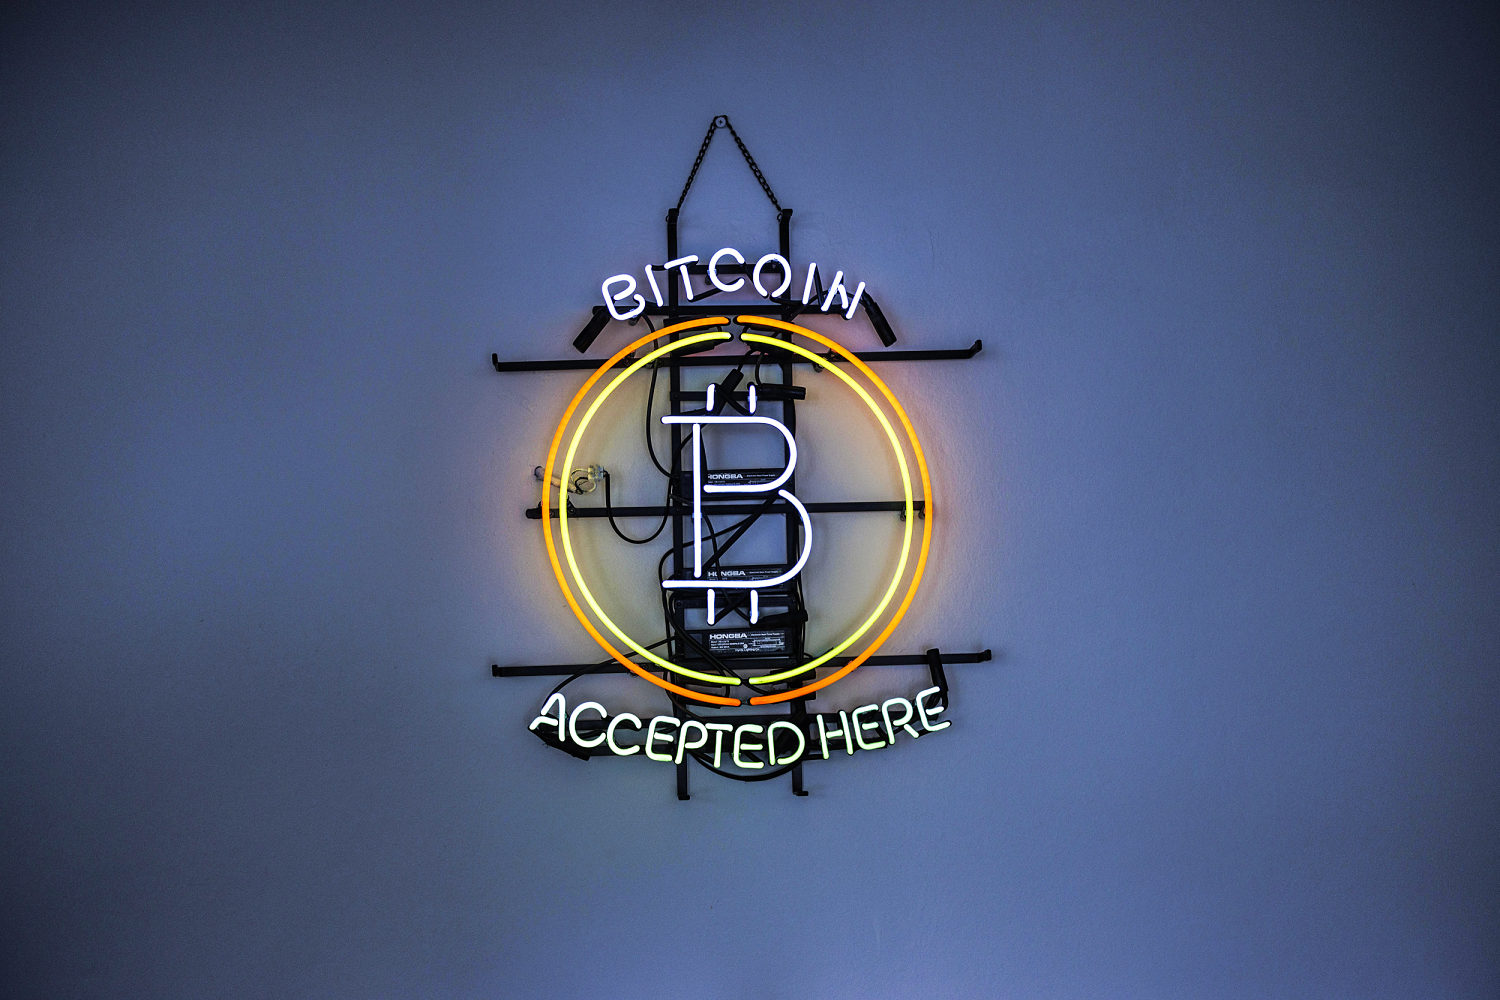 Mt. Gox begins repaying bitcoin to creditors a decade after exchange's collapse. What it means.